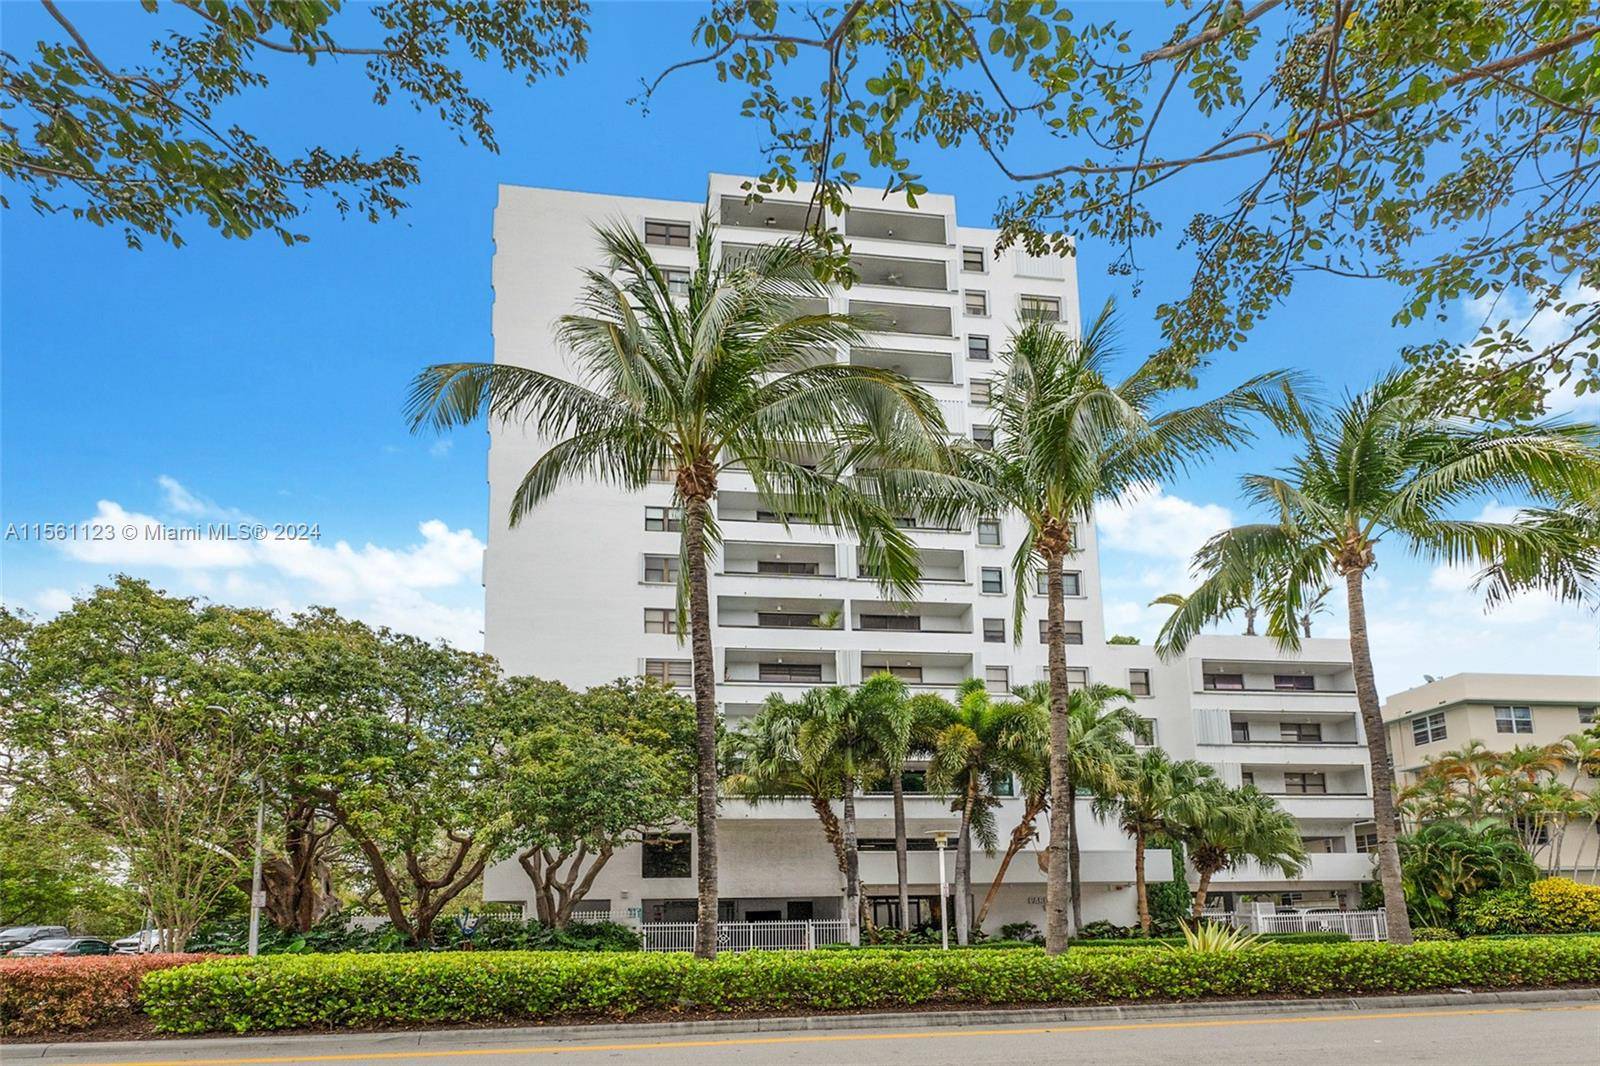 Discover your dream condo, nestled in the heart of South Beach.